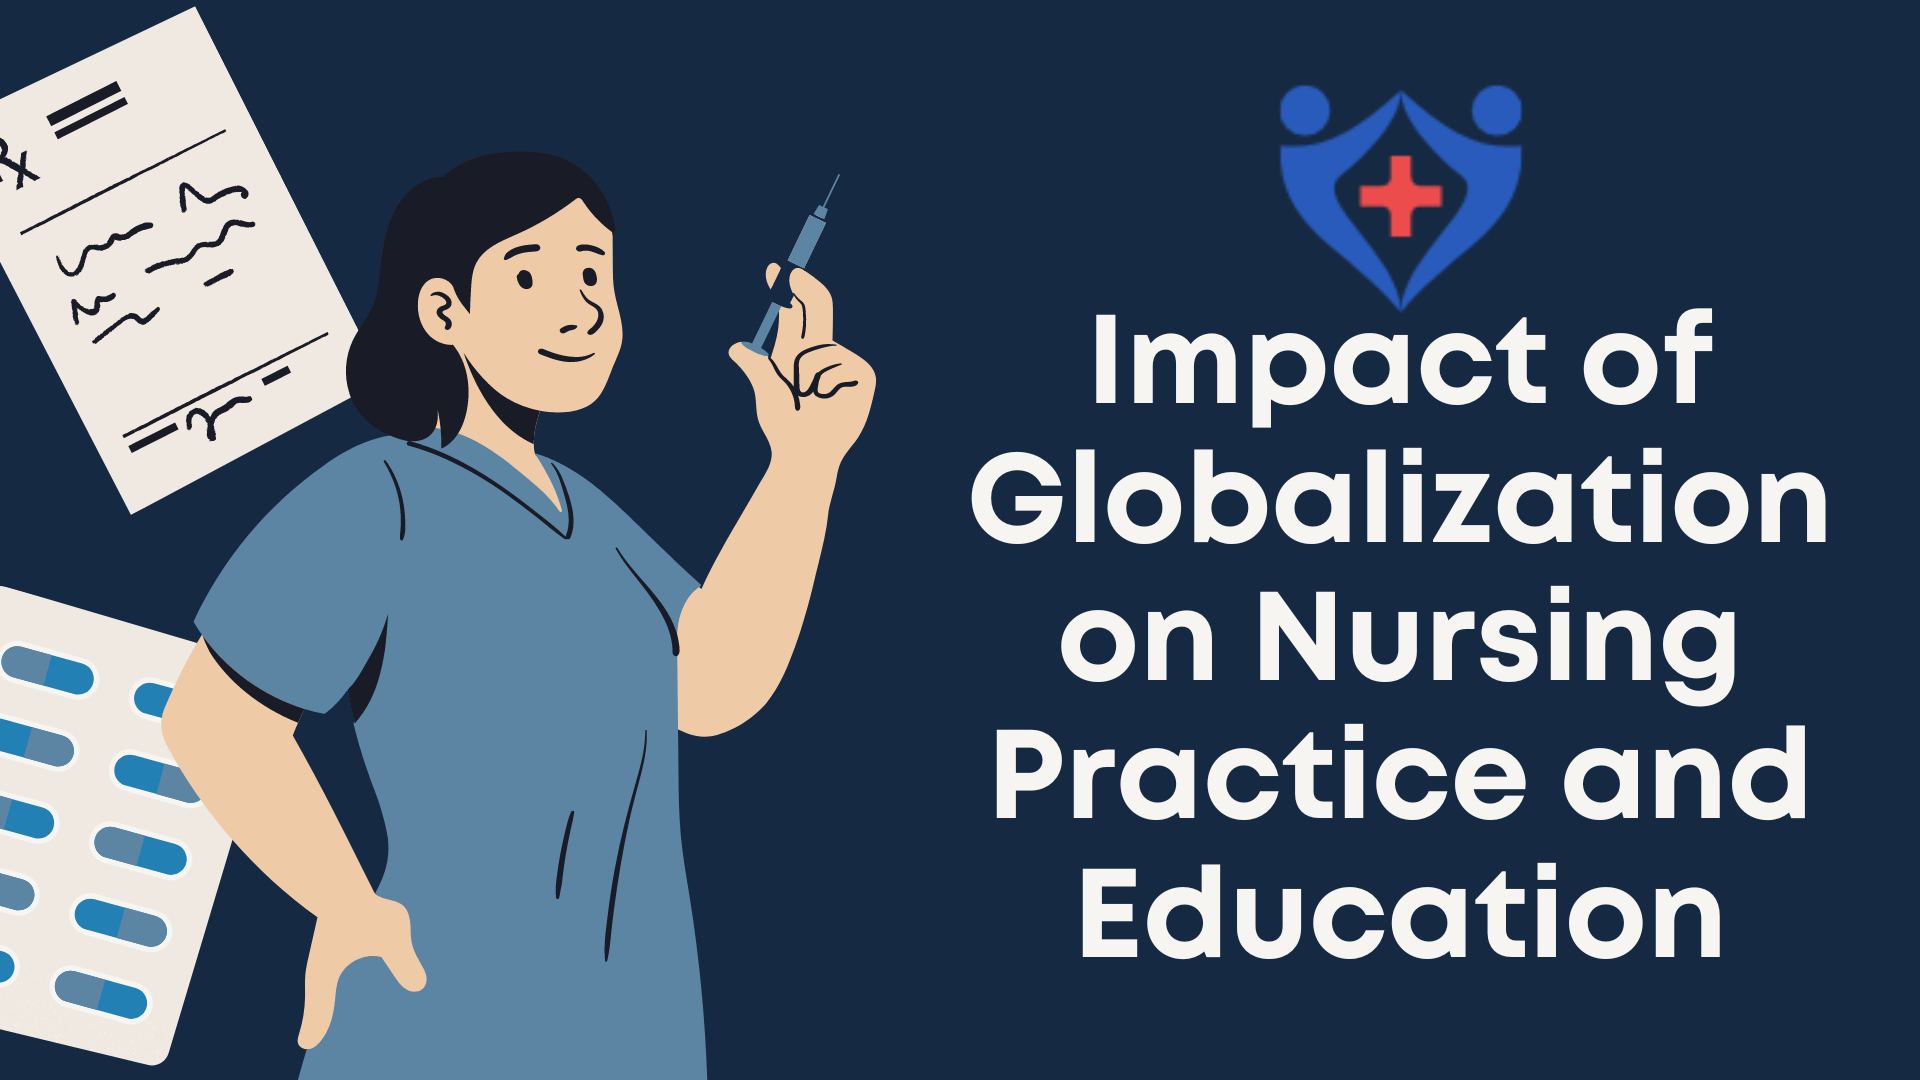 Impact of Globalization on Nursing Practice and Education